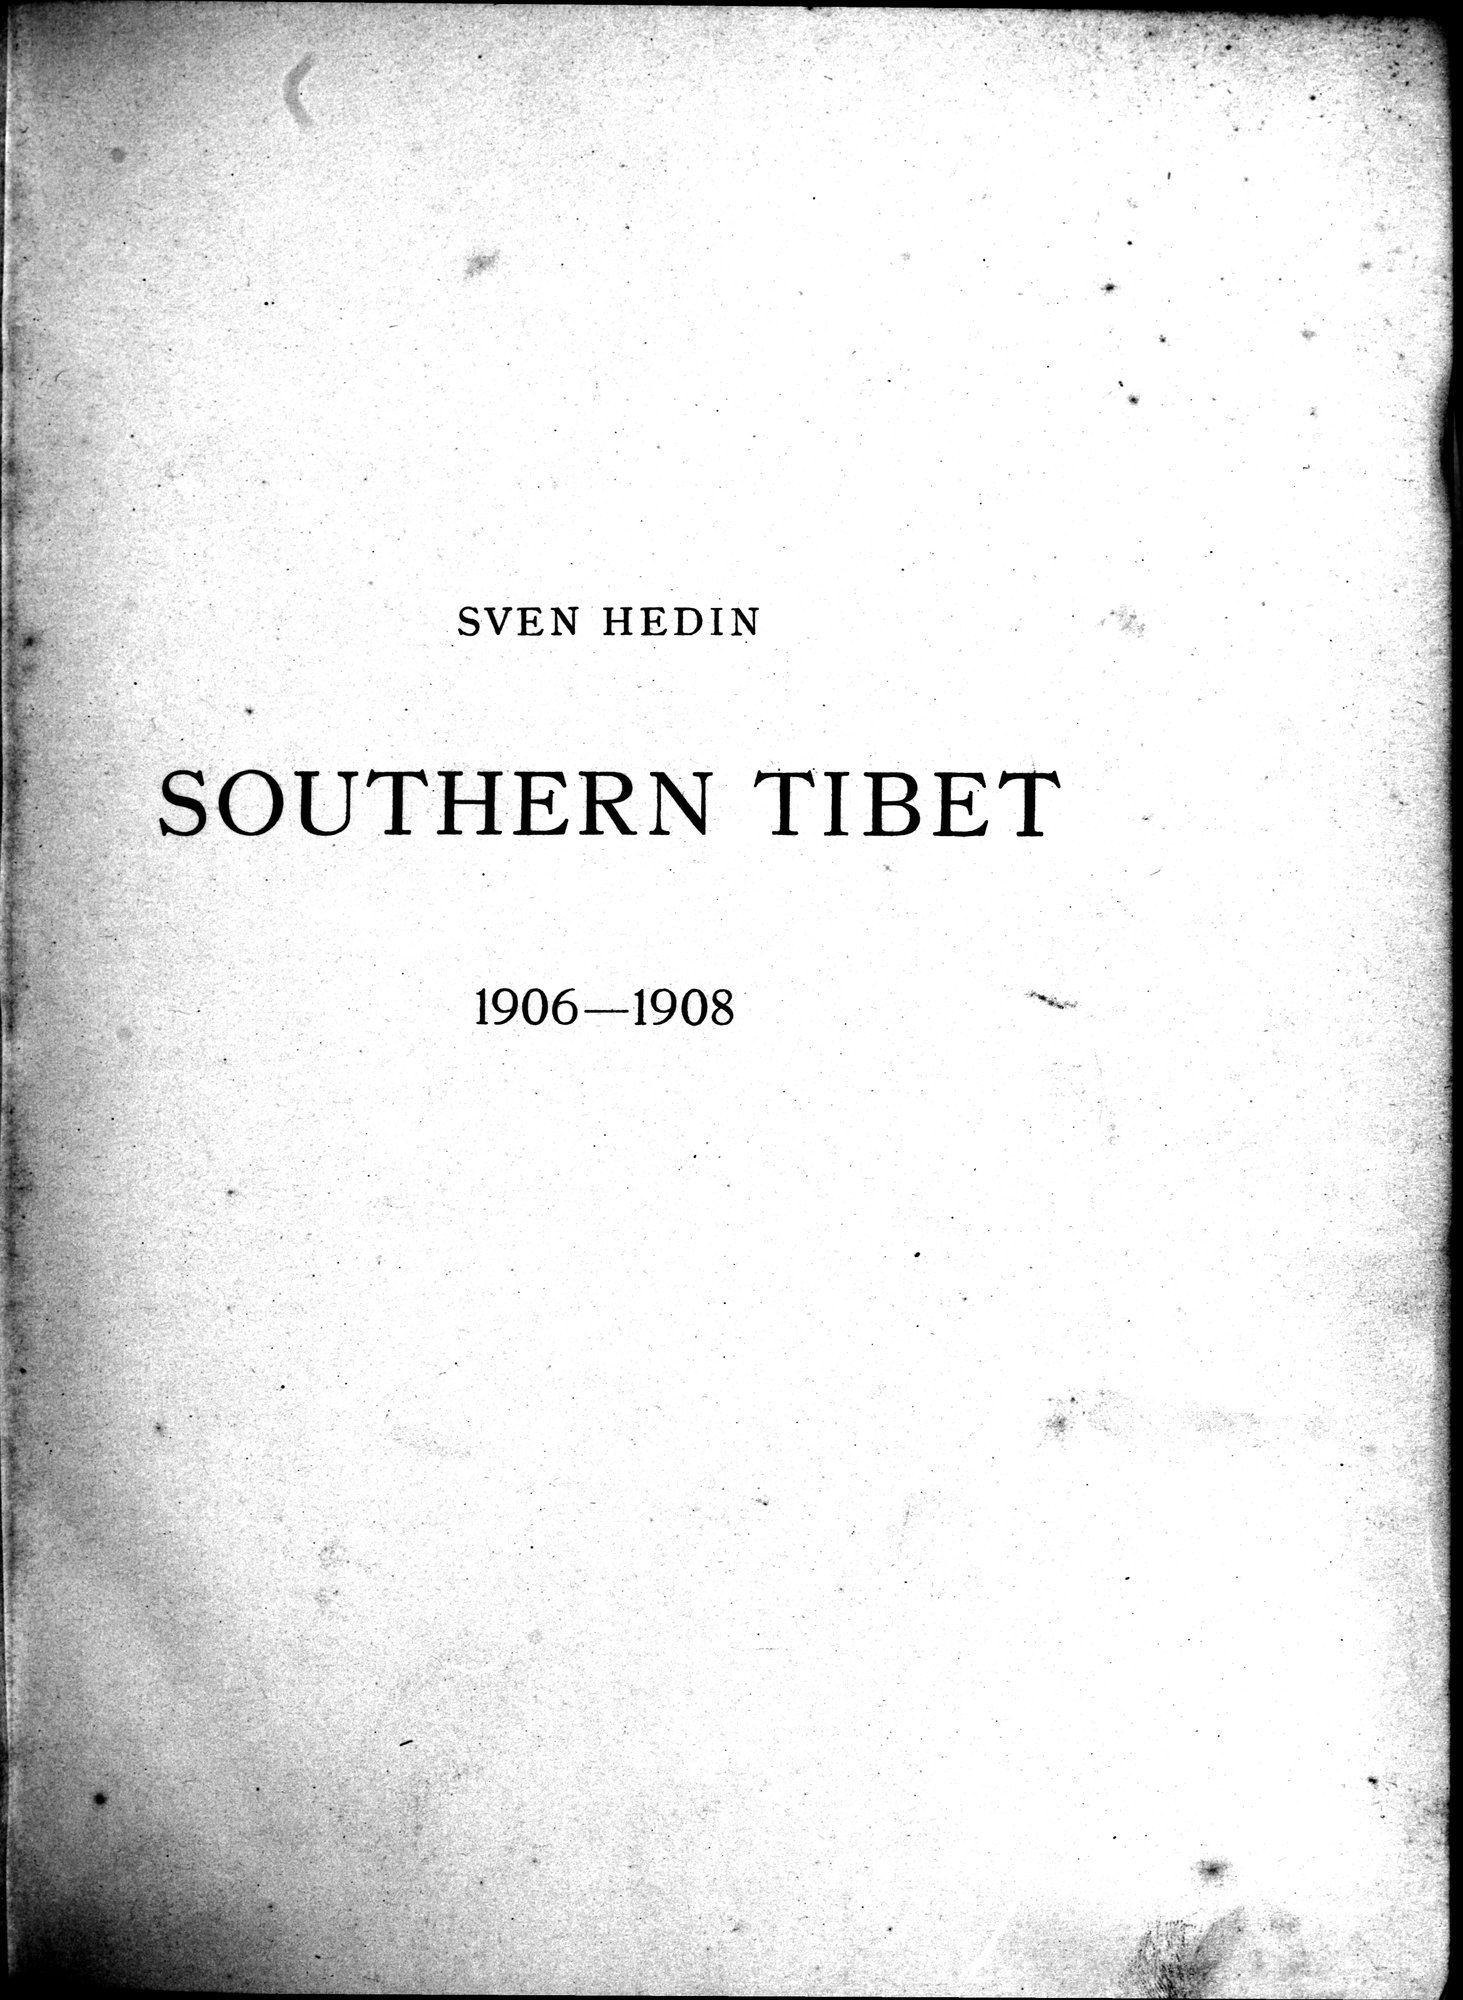 Southern Tibet : vol.7 / Page 9 (Grayscale High Resolution Image)